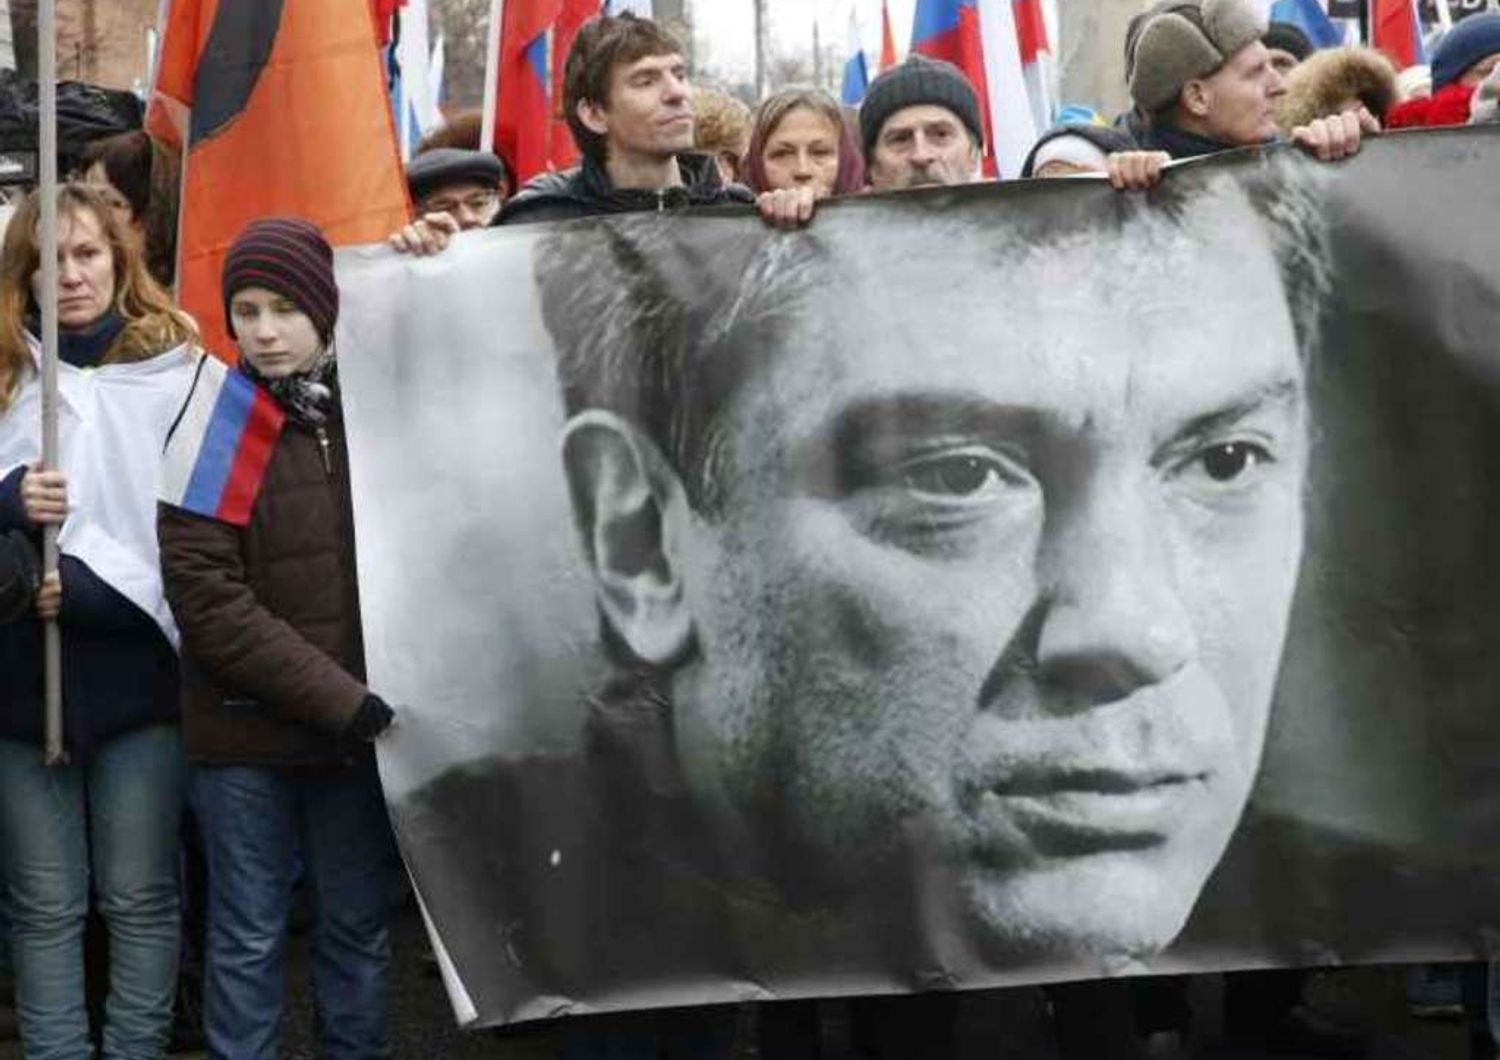 Sacrilege to politicise politician's murder, says Moscow